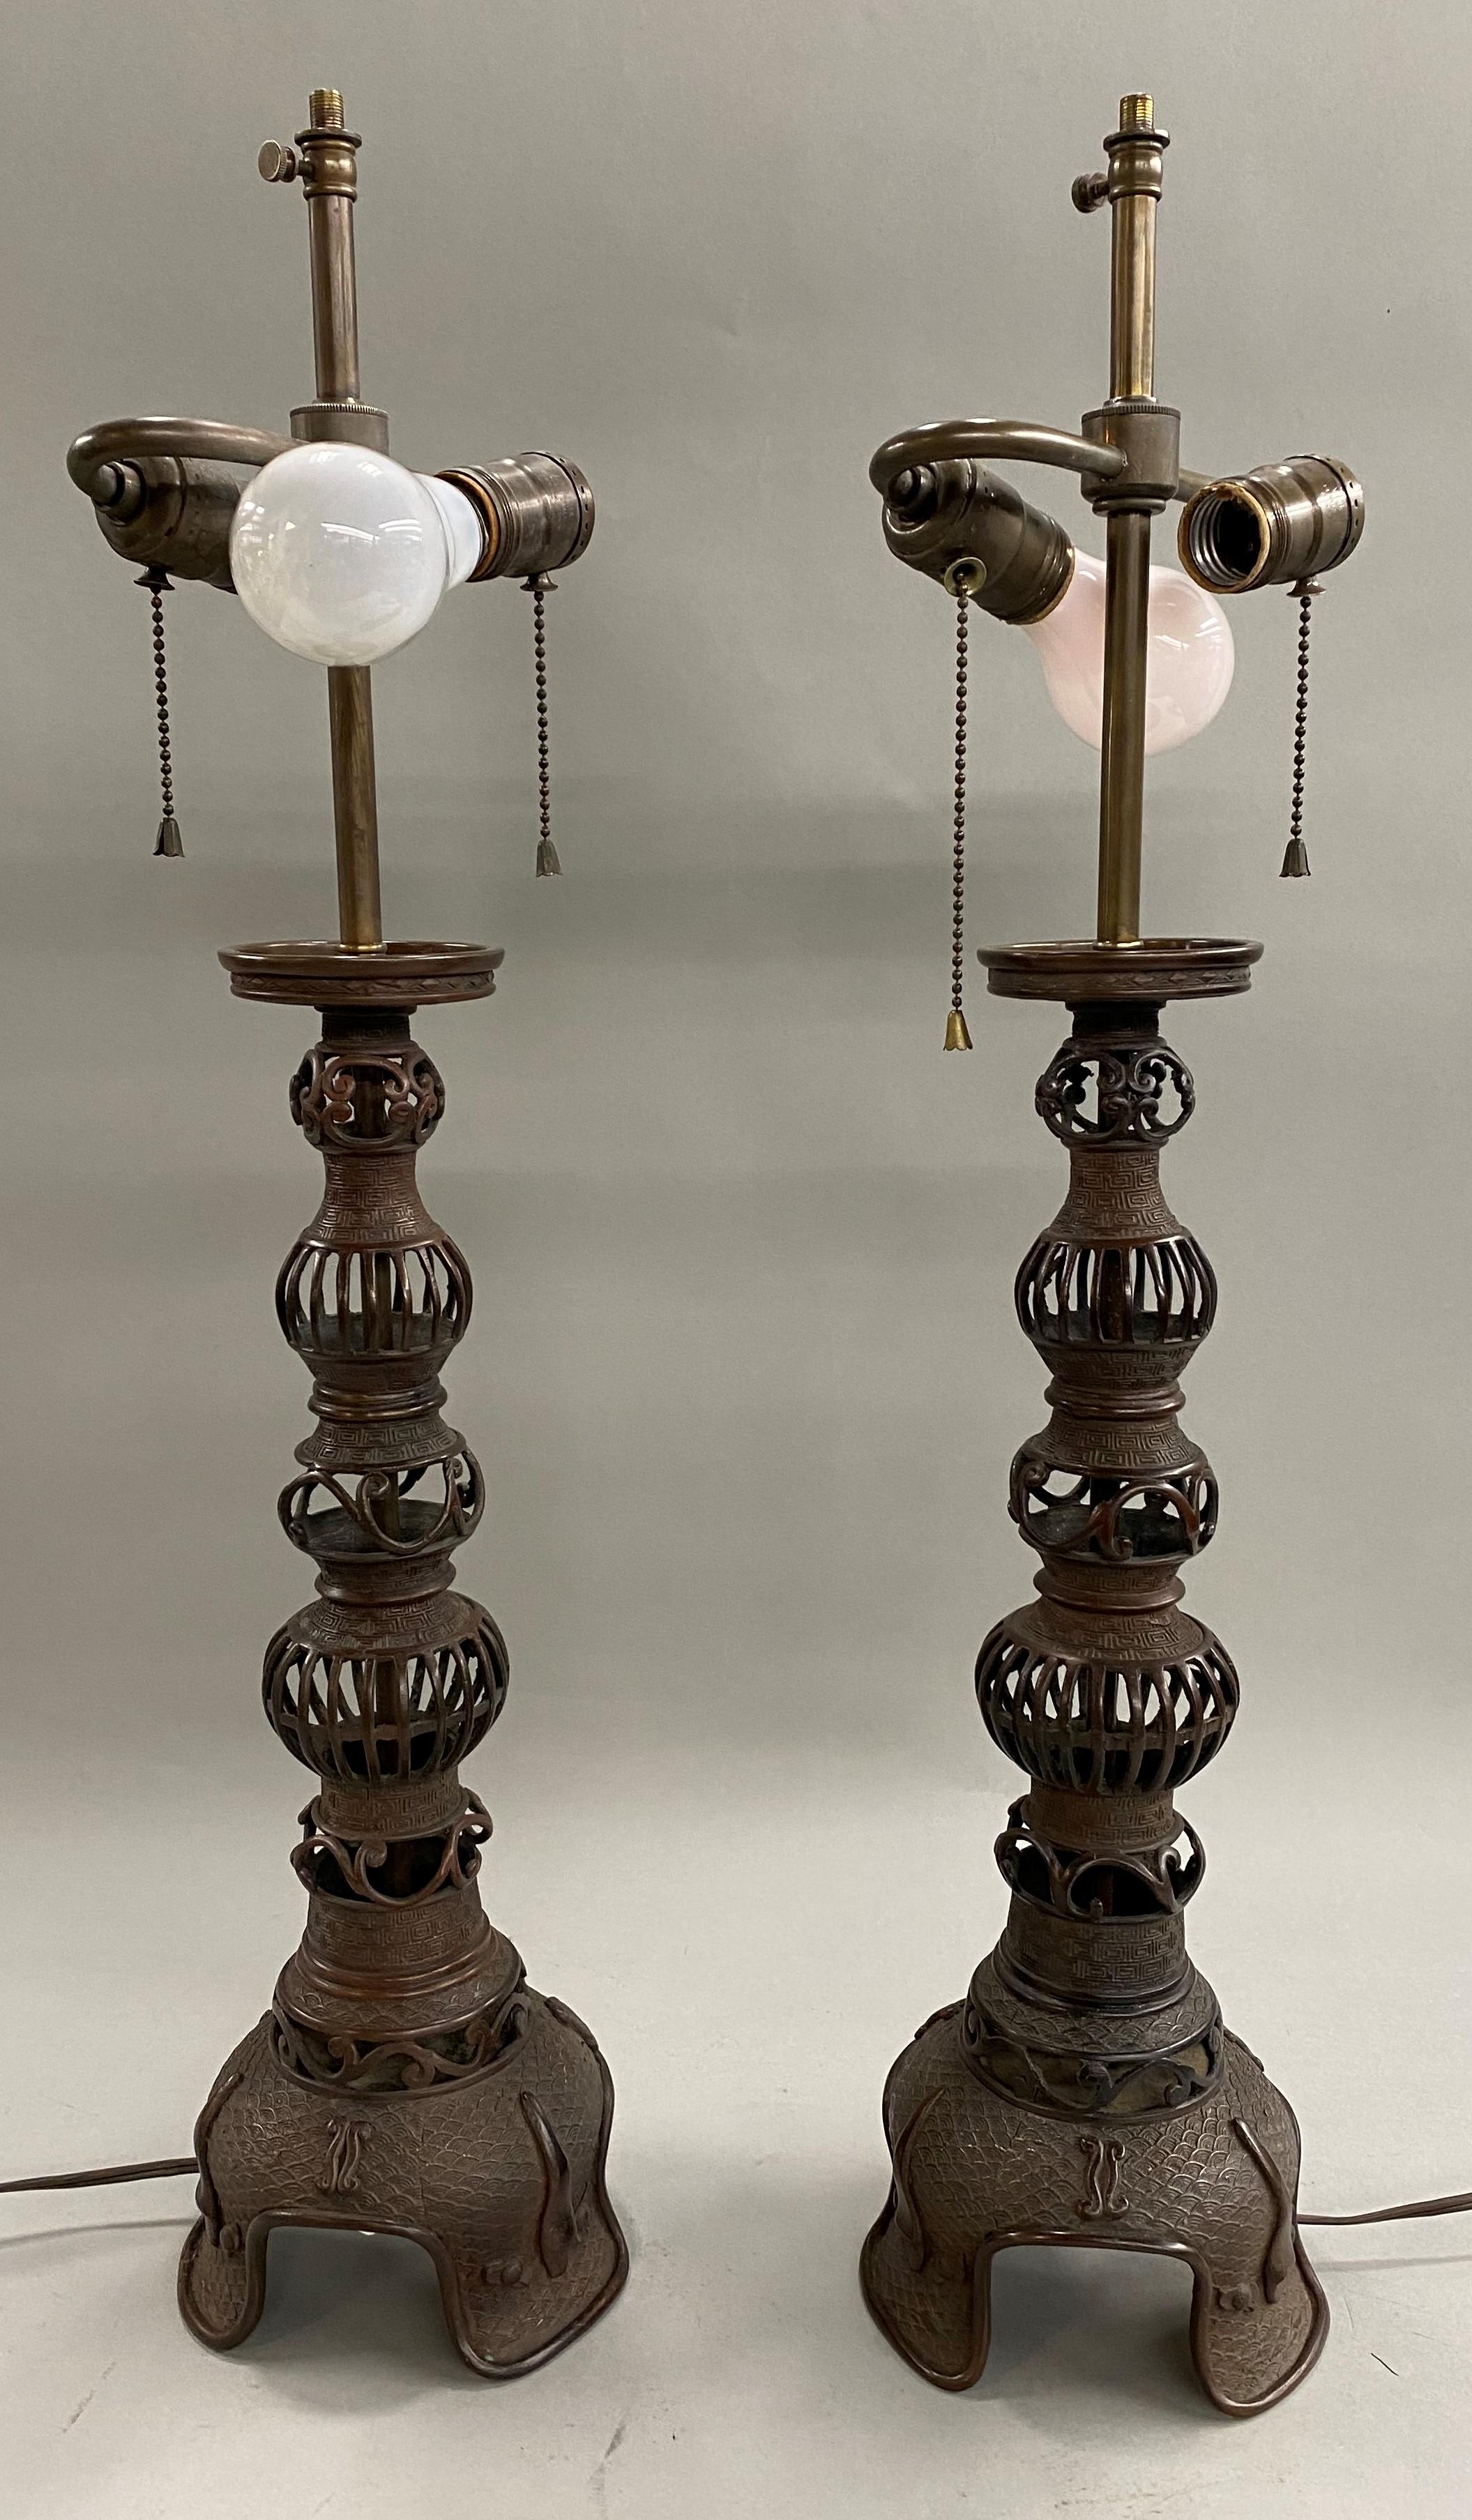 Cast Pair of Japanese Meiji Reticulated Bronze Table Lamps with Decorative Shades